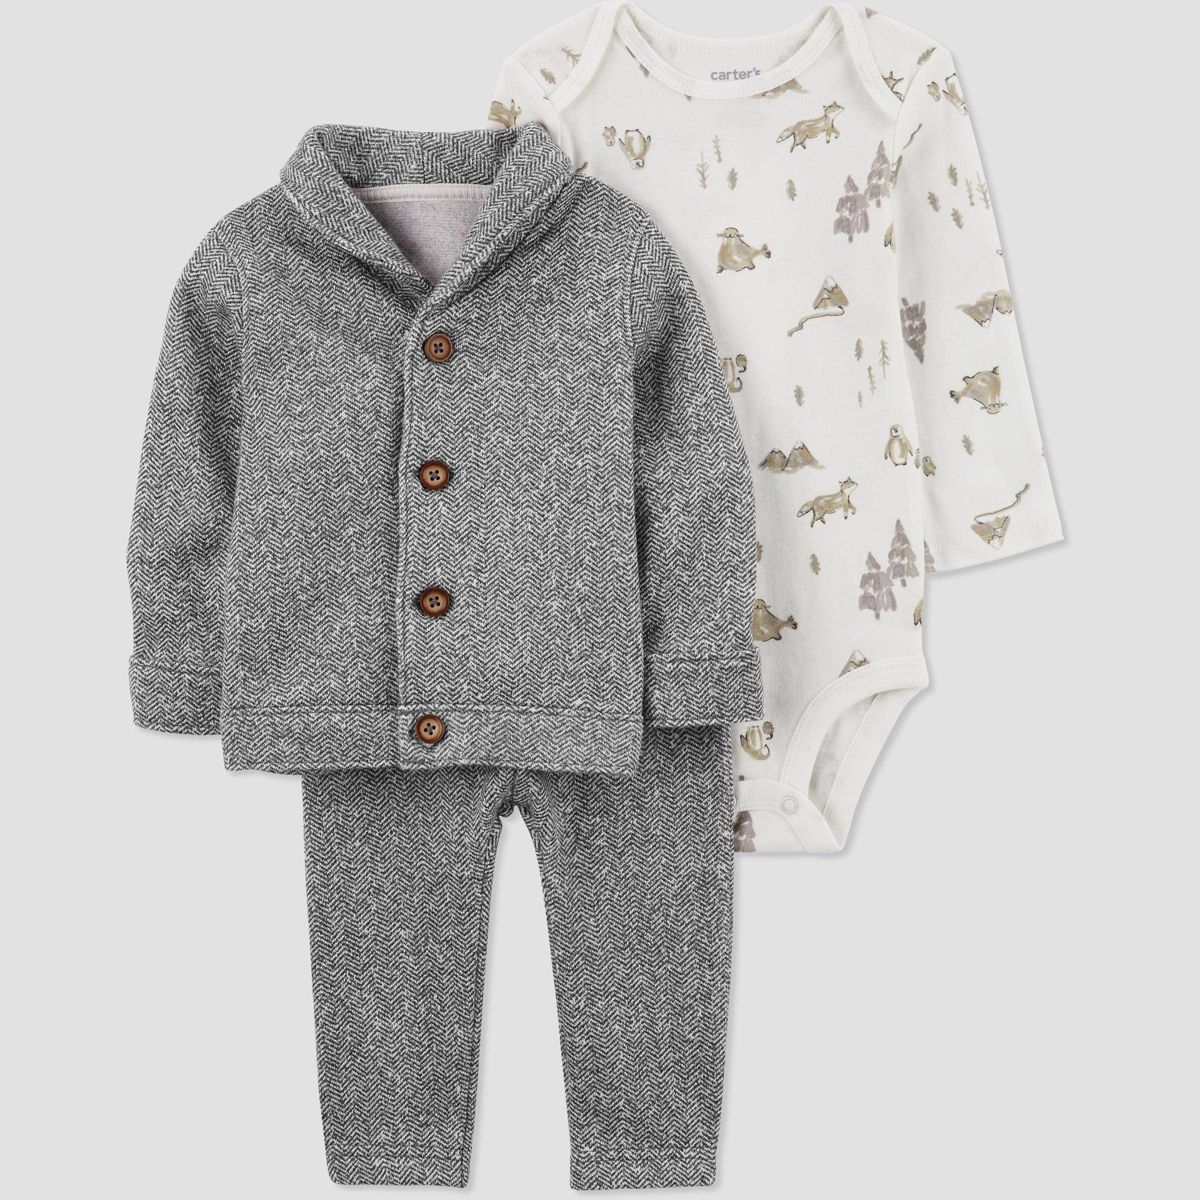 Carter's Just One You®️ Baby Boys' 3pc Forest Top & Bottom Set - Gray | Target